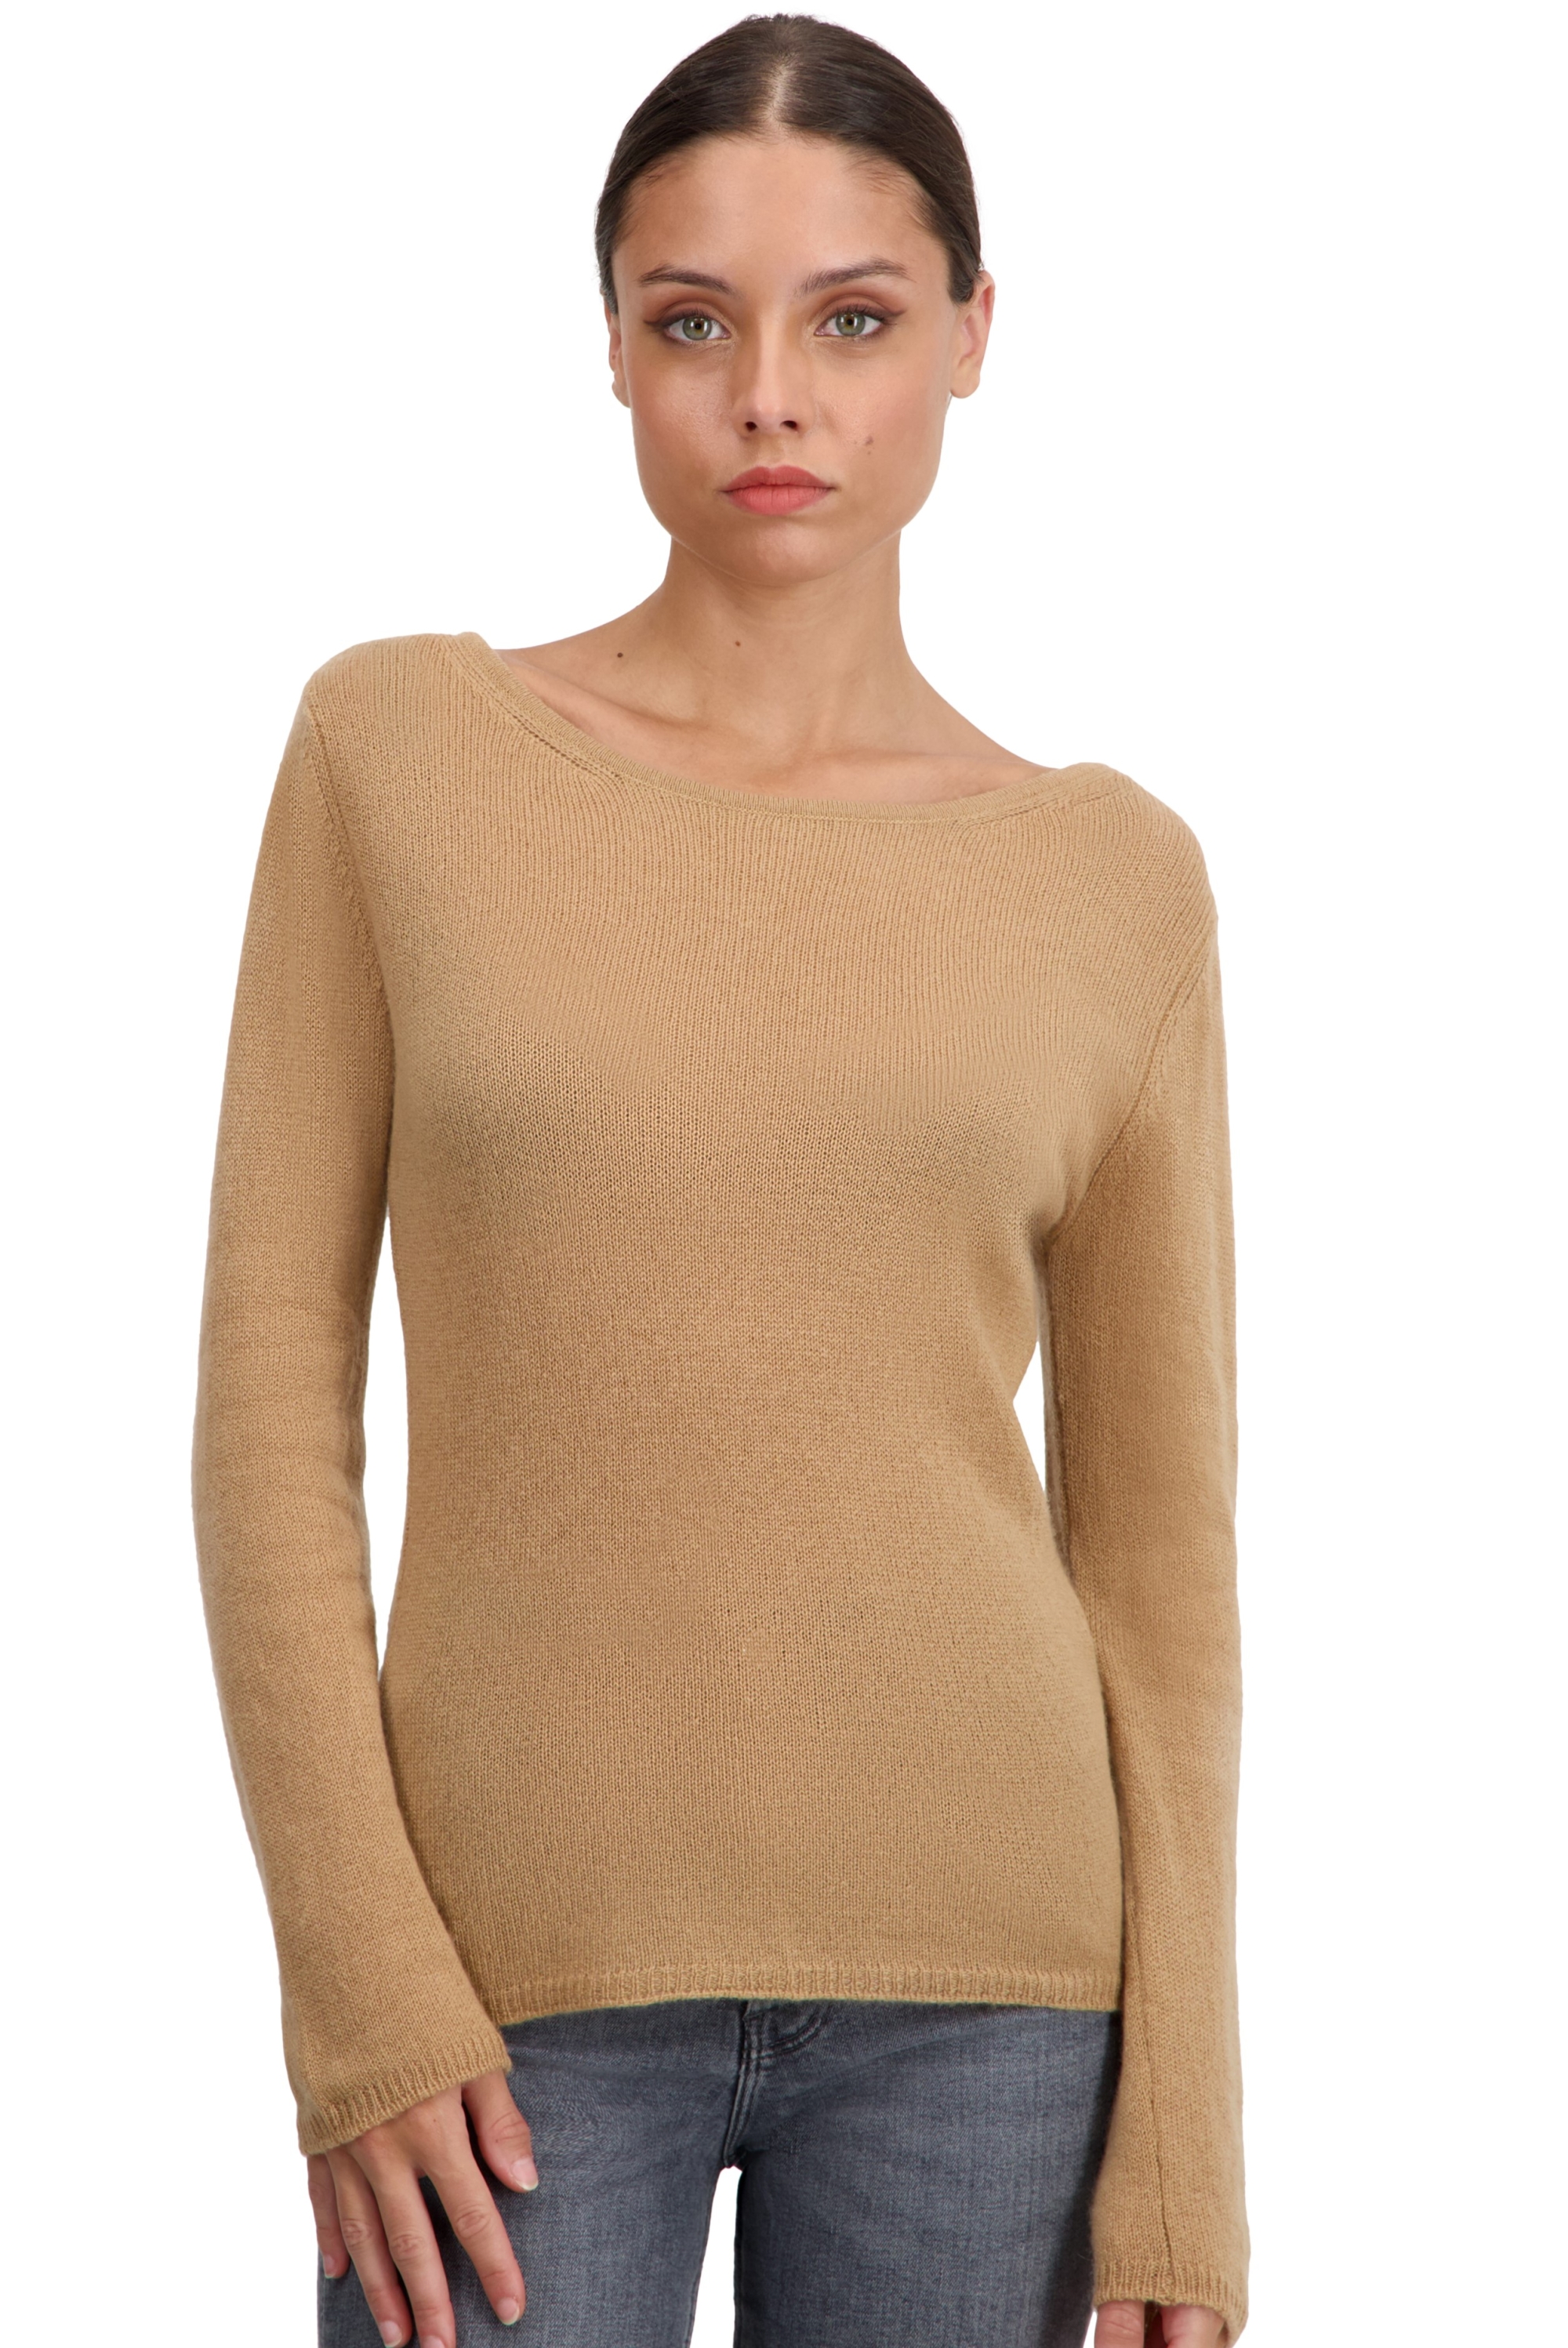 Cashmere ladies timeless classics caleen camel xl